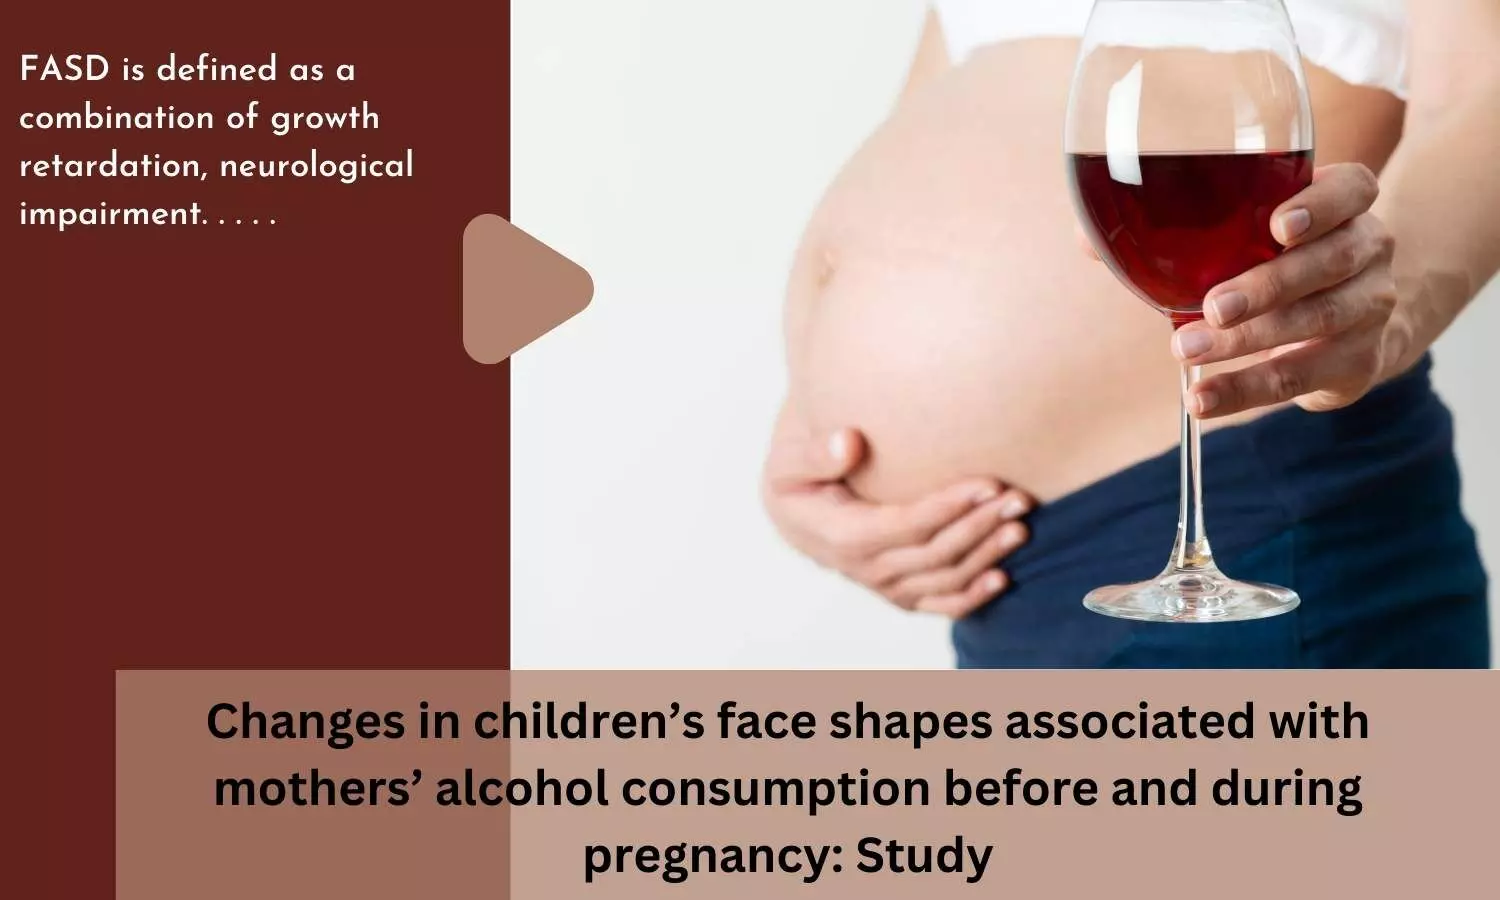 Changes in childrens face shapes associated with mothers alcohol consumption before and during pregnancy: Study